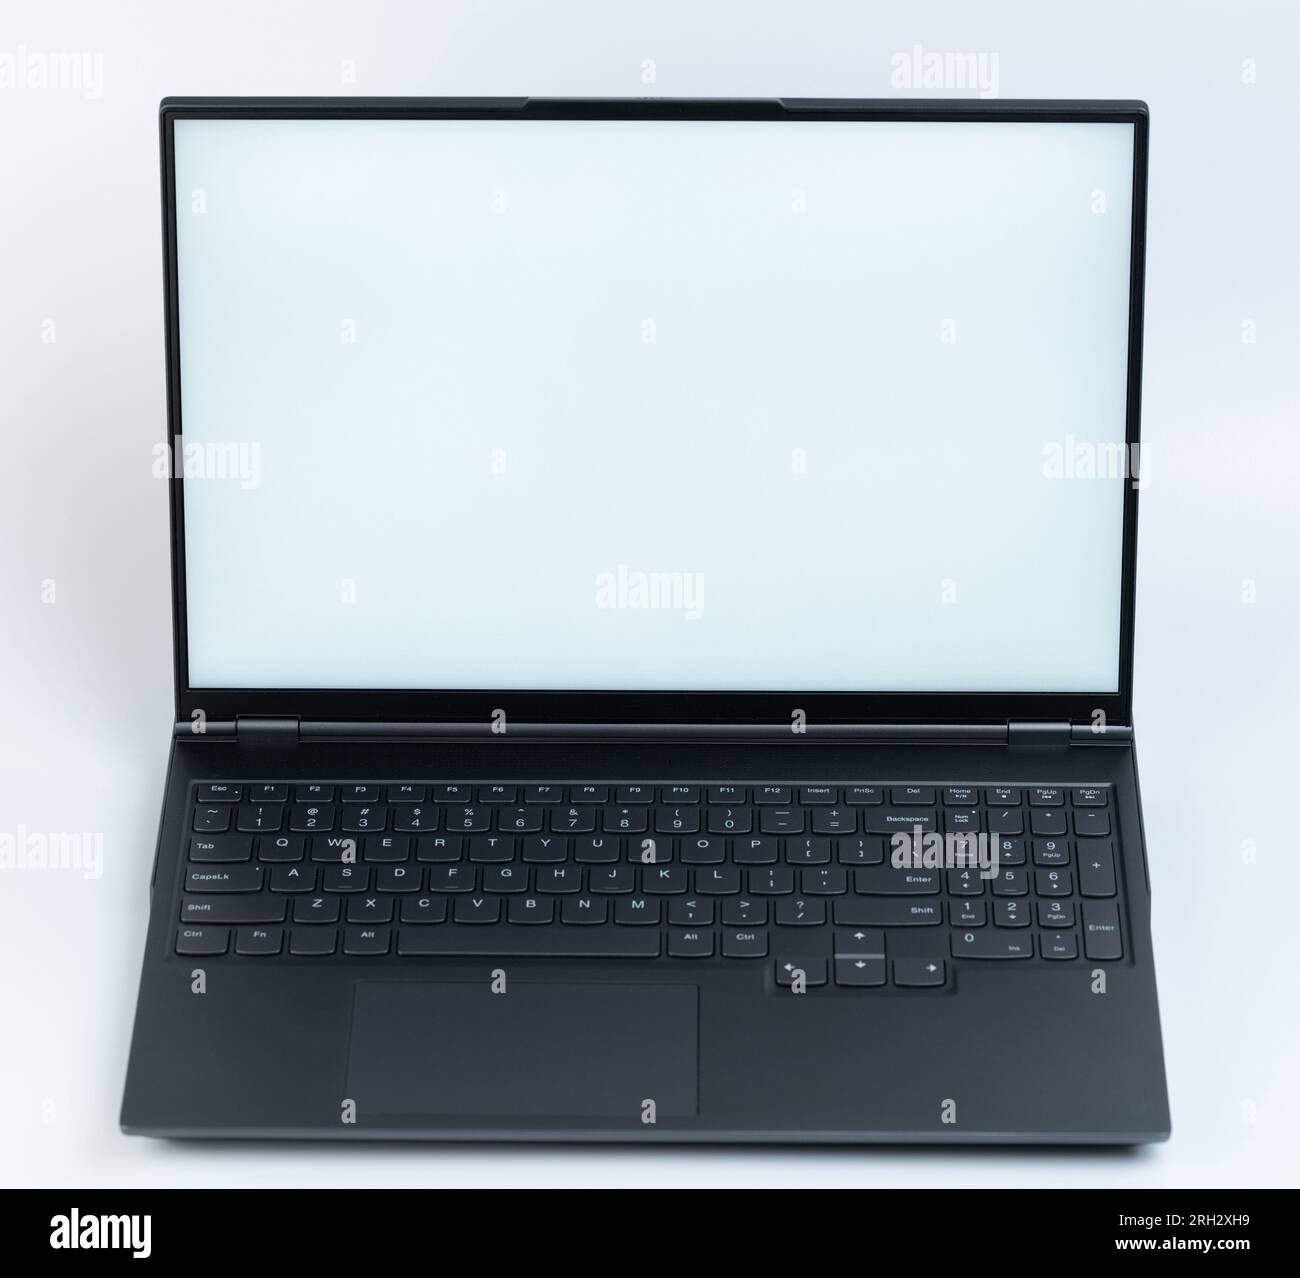 Black laptop with full keyboard front view isolated on studio background Stock Photo